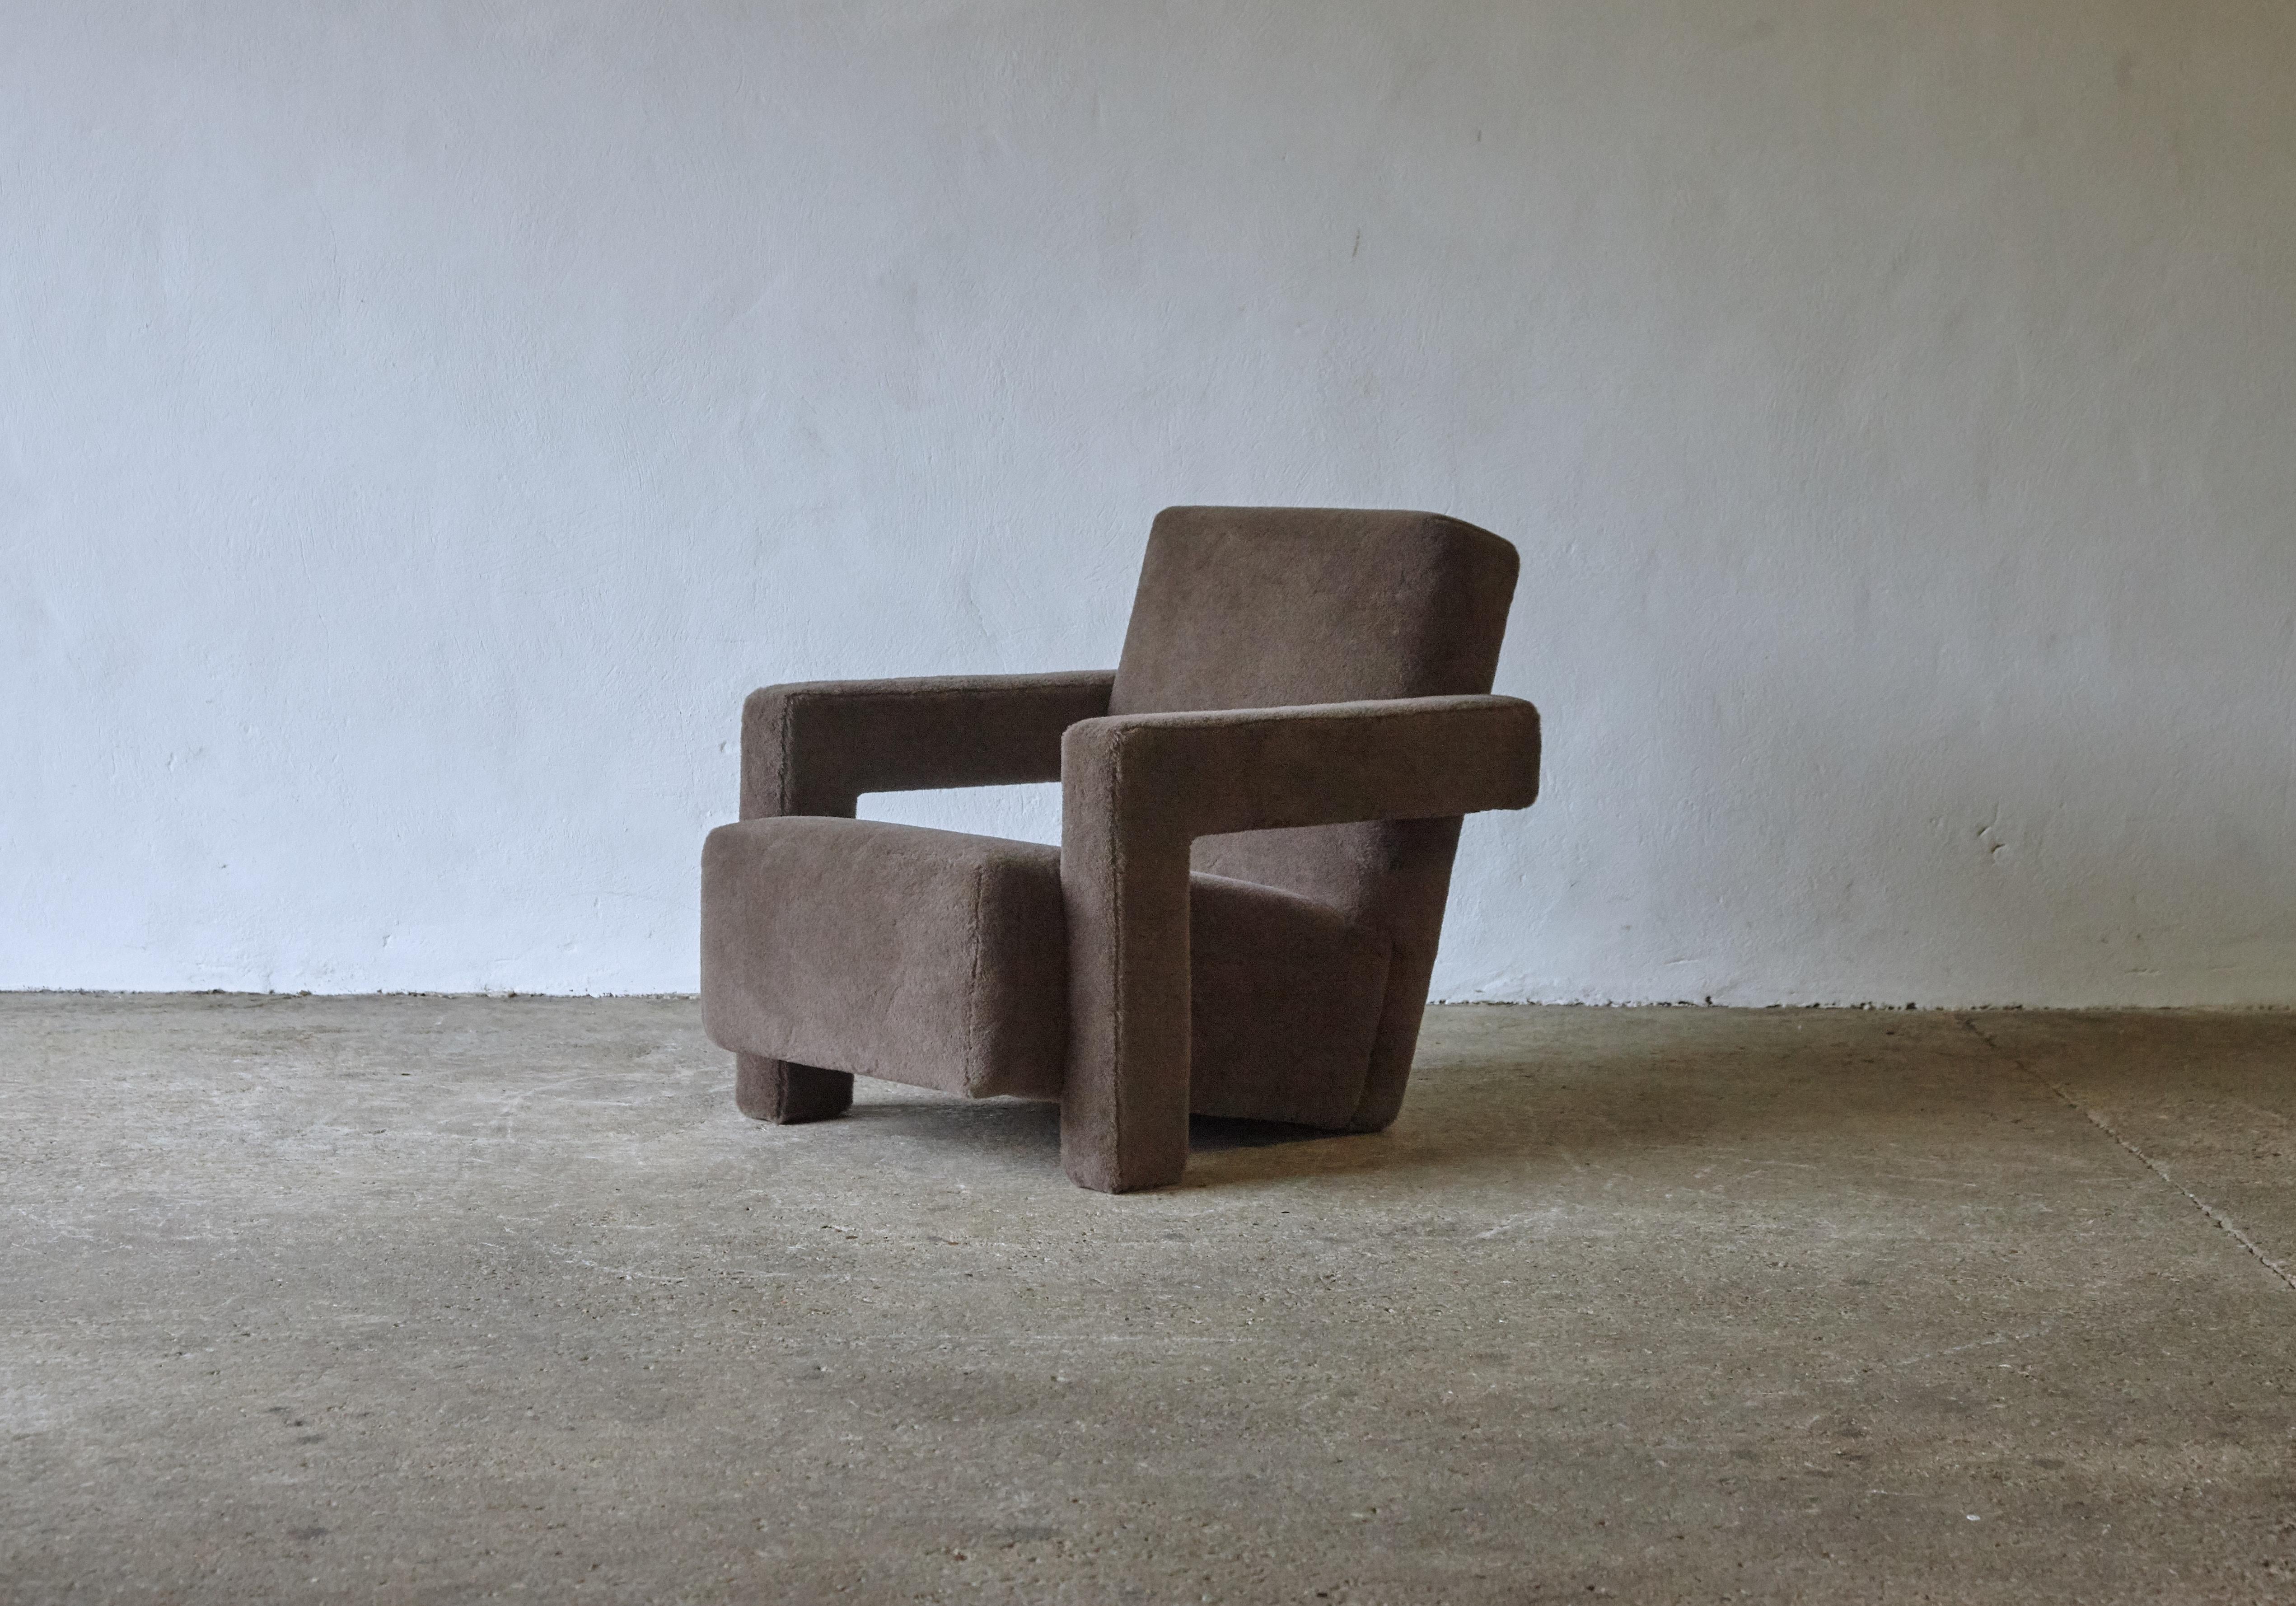 A Gerrit Rietveld Utrecht armchair, produced by Cassina, and newly upholstered in a brown / grey thick, soft, luxurious 100% alpaca pile fabric. Cassina label to the underneath. Fast shipping worldwide.

UK customers please note: displayed prices